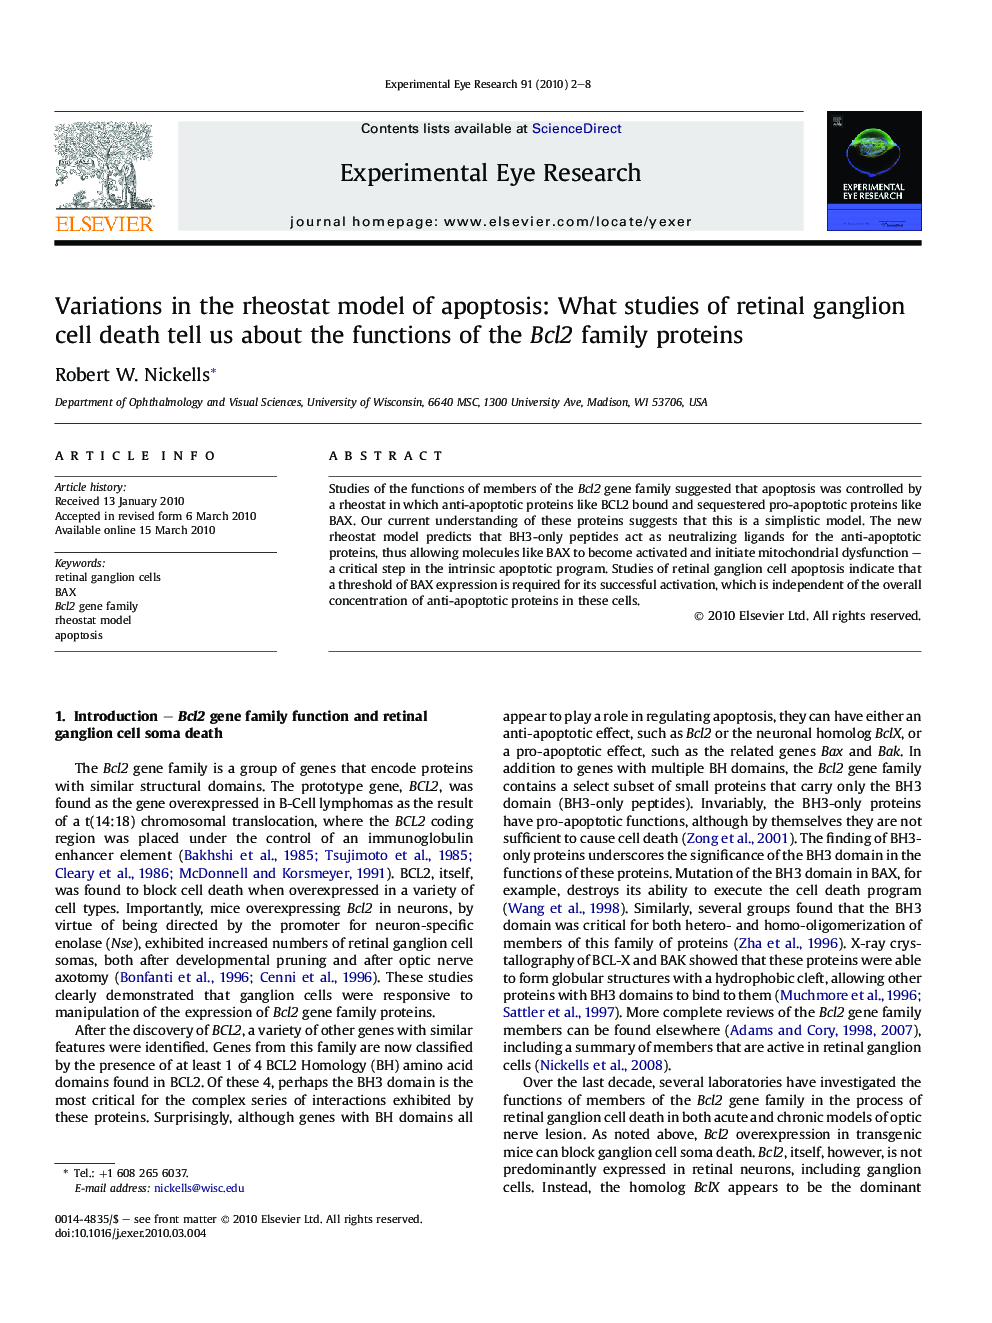 Variations in the rheostat model of apoptosis: What studies of retinal ganglion cell death tell us about the functions of the Bcl2 family proteins